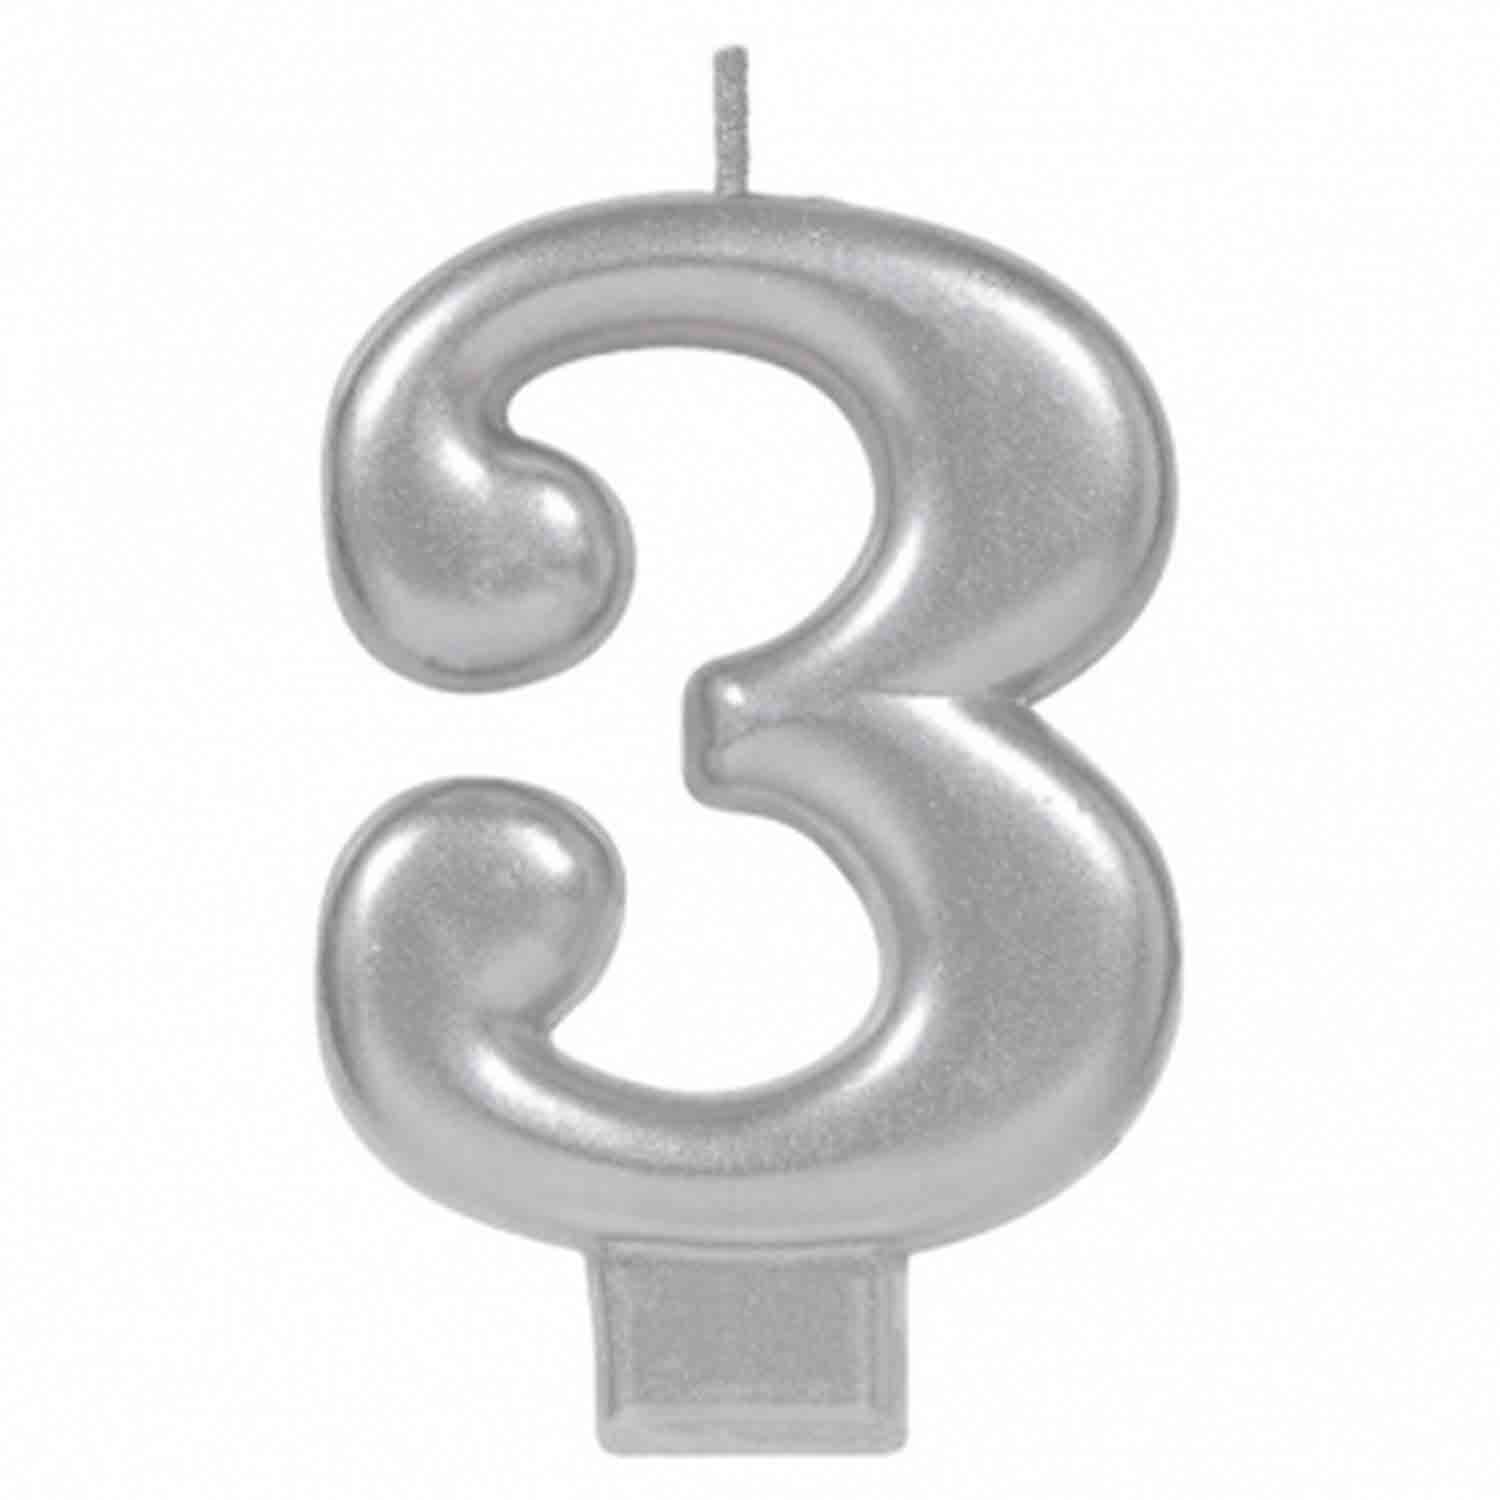 Silver Number 3 Candle